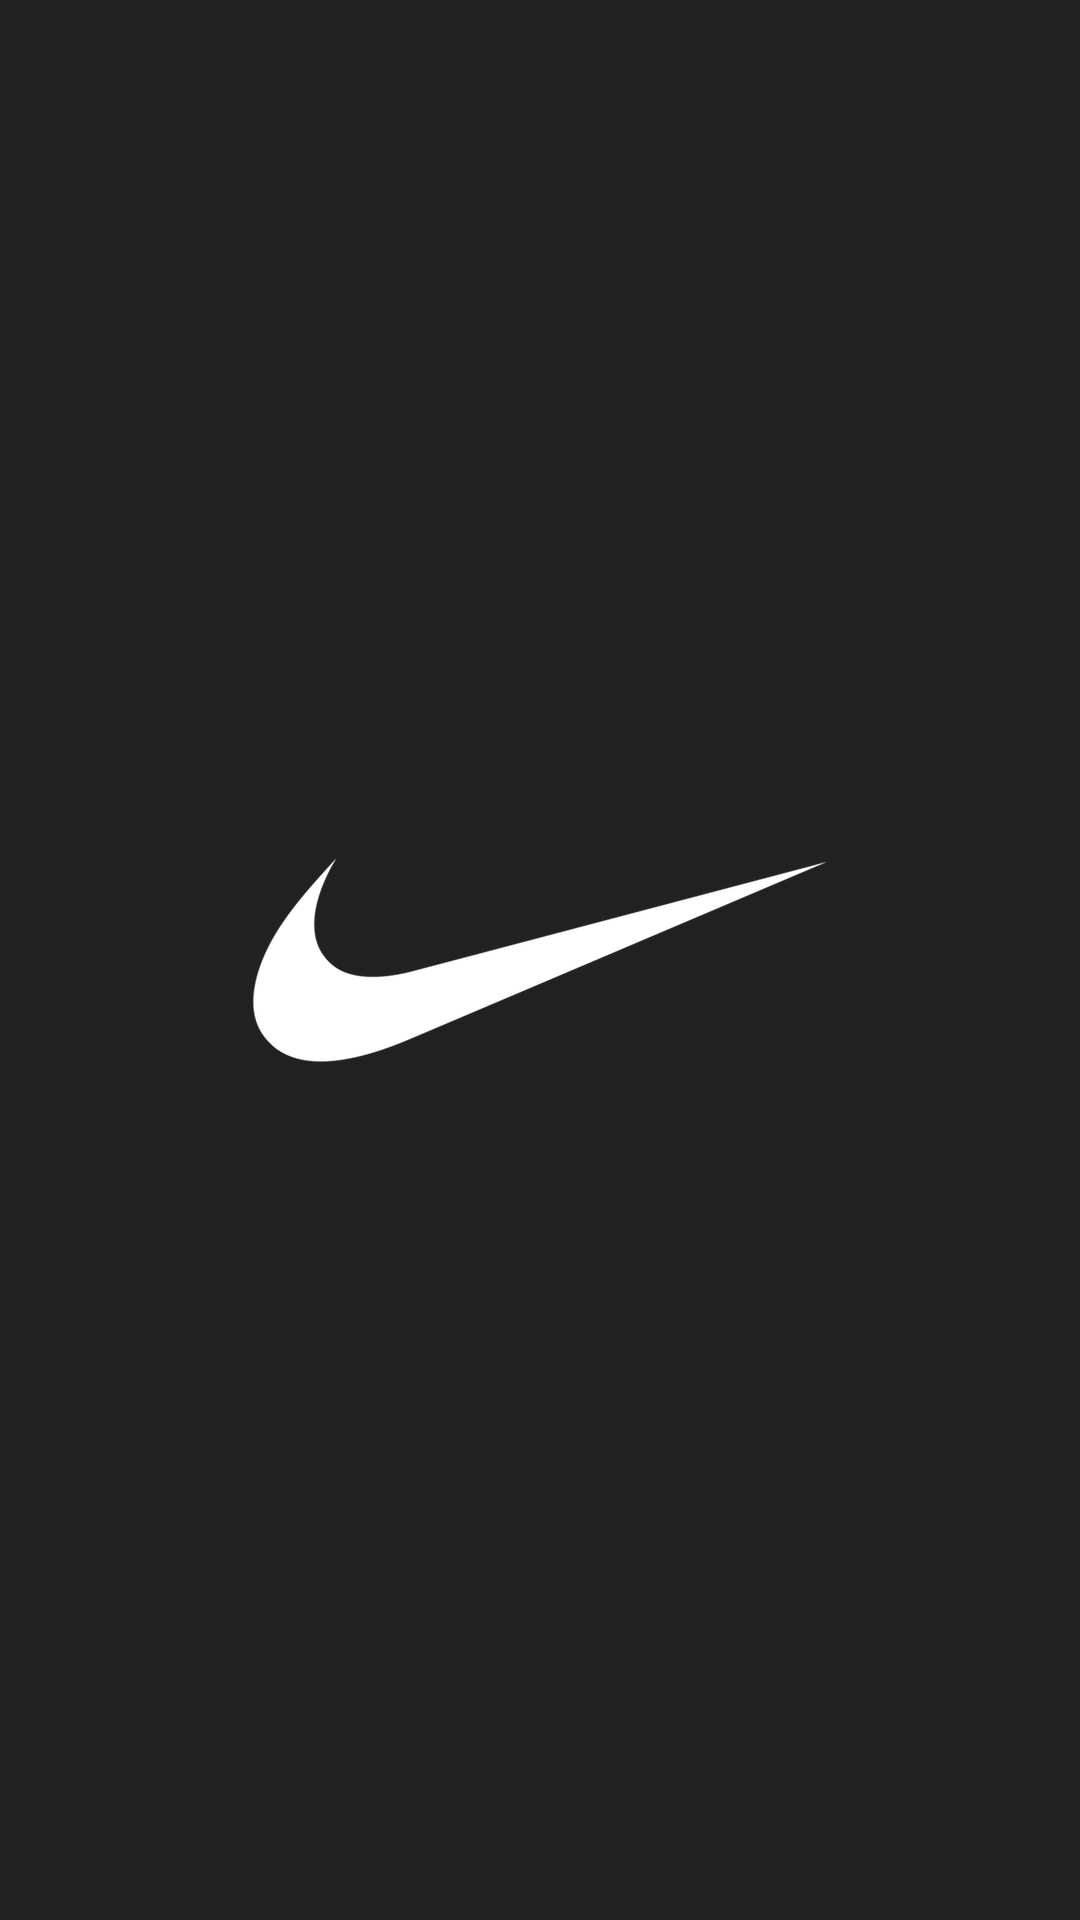 Nike Black And White Wallpapers